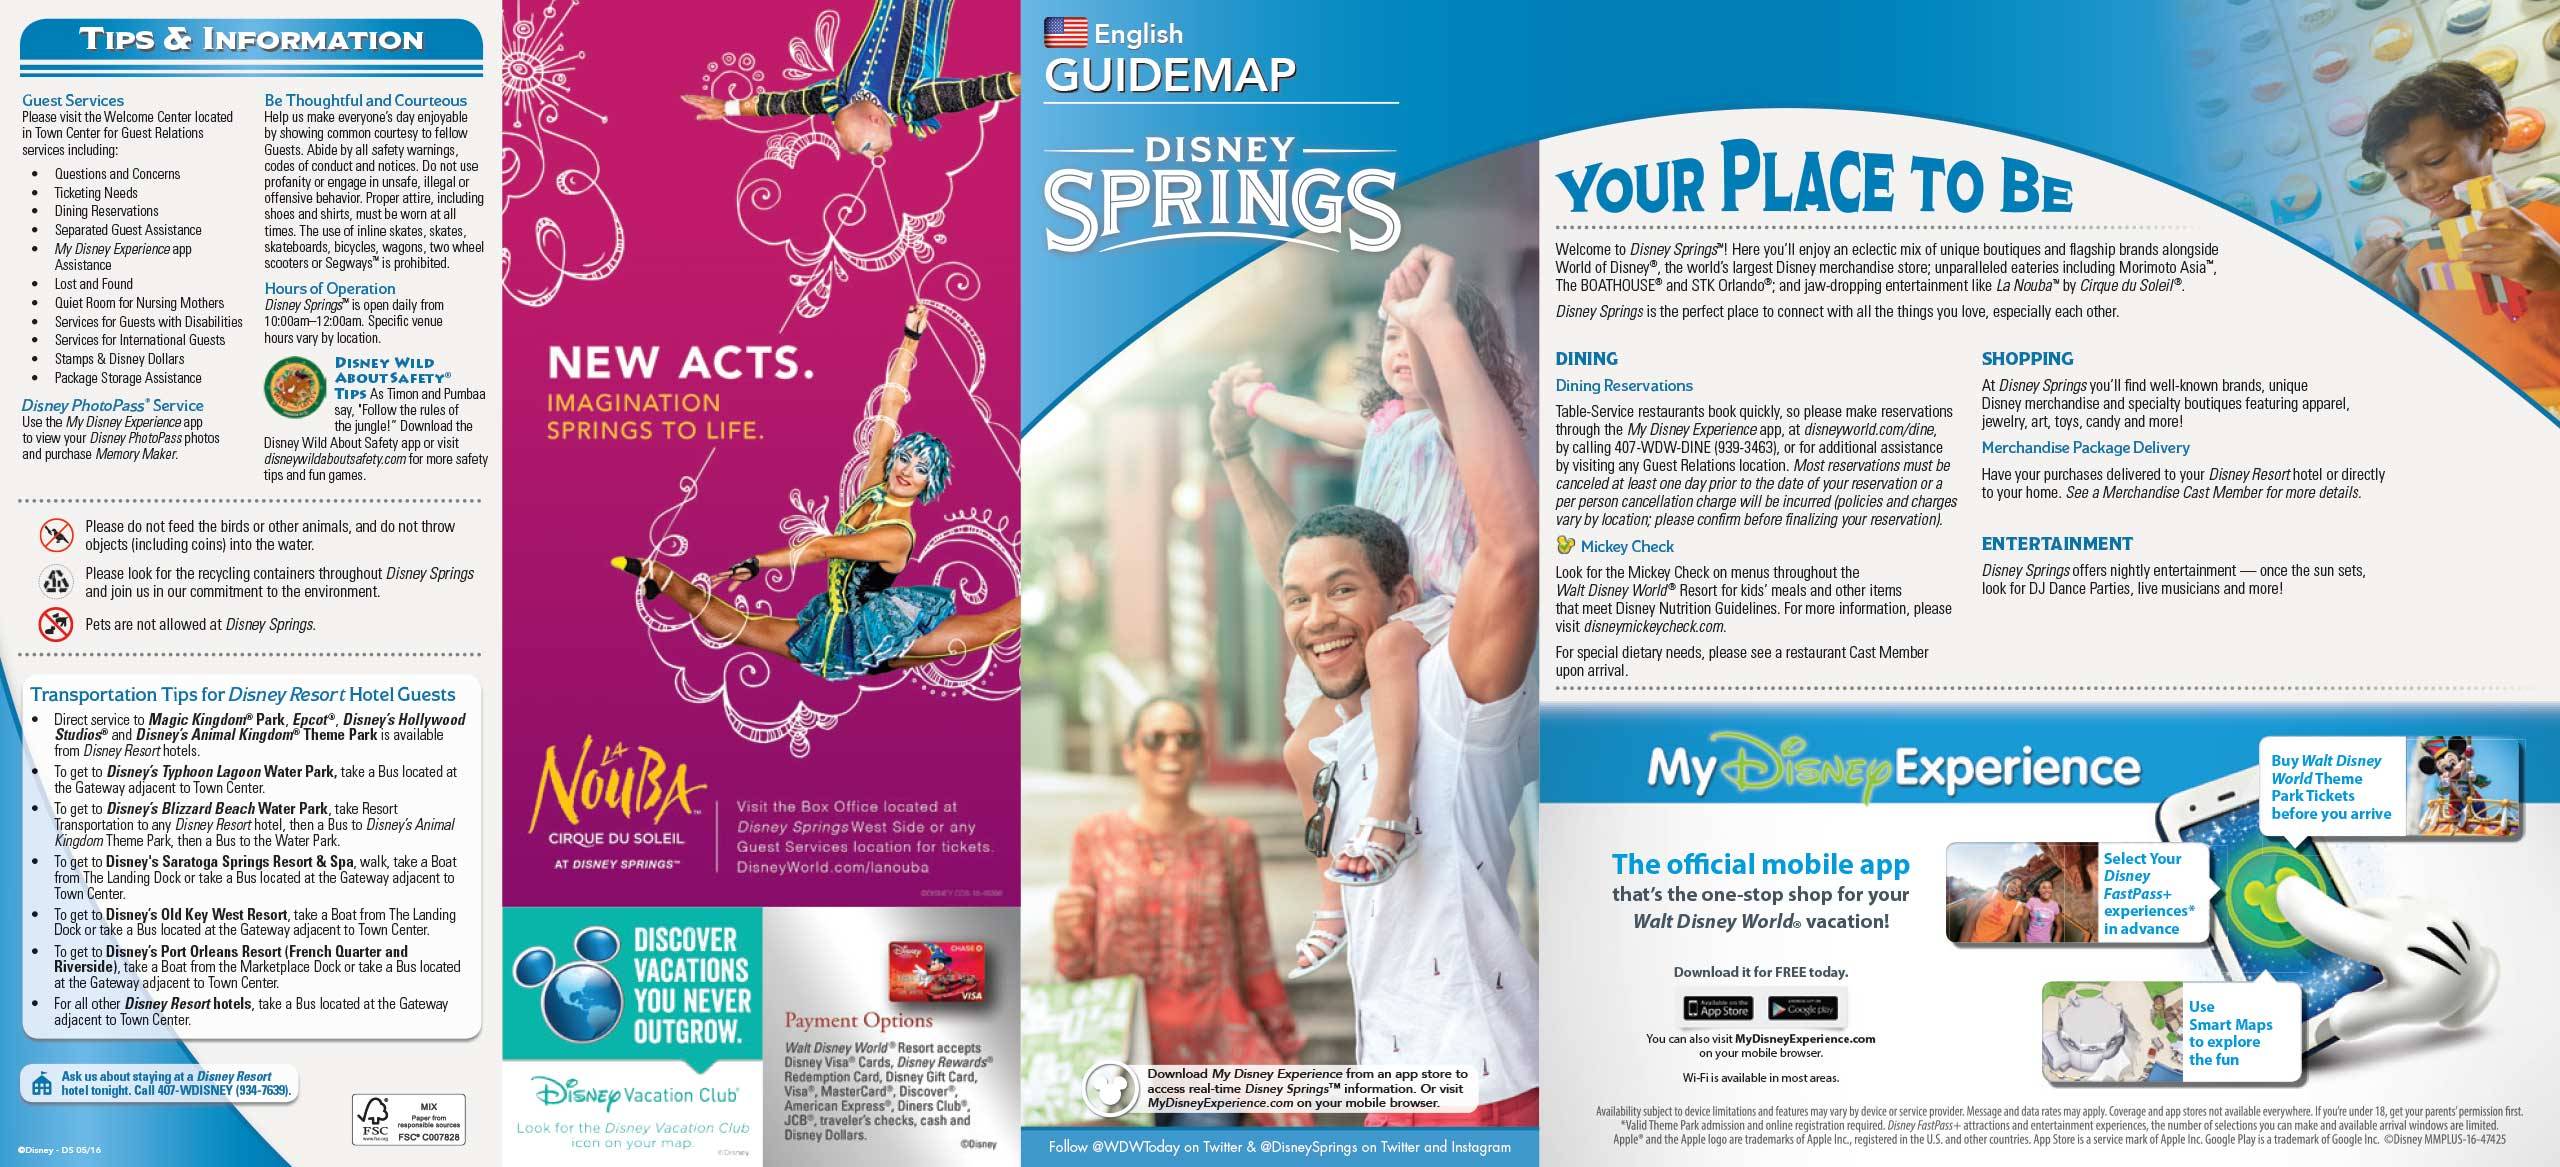 Disney Springs Guide Map May 2016 - Front